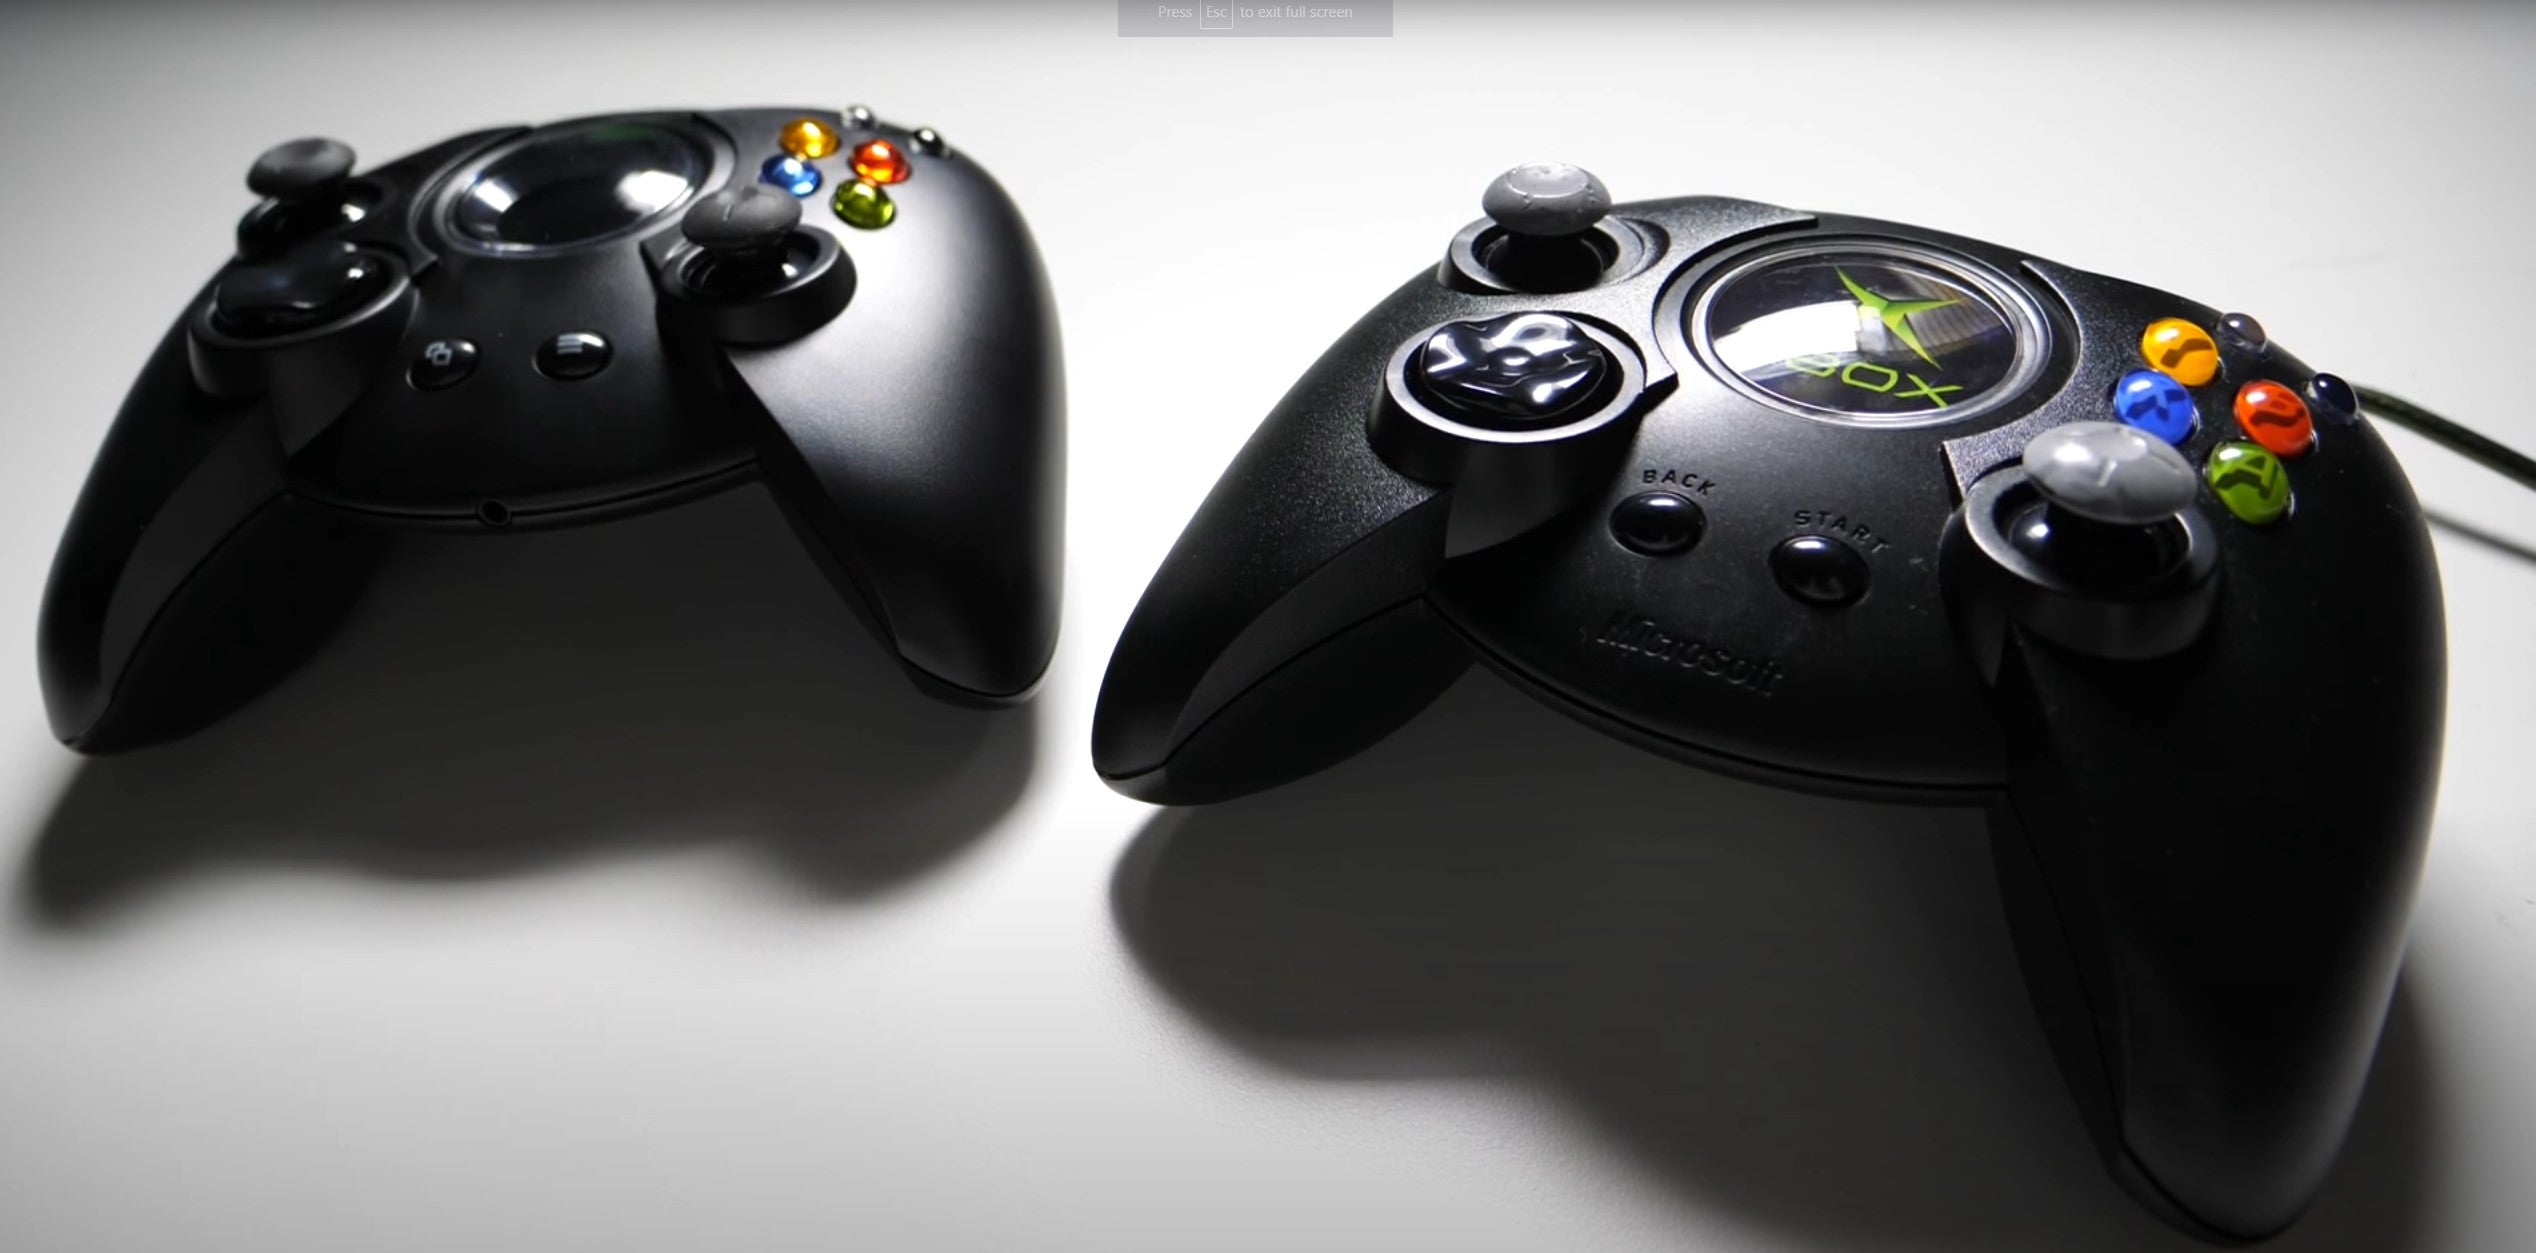 Original Xbox Duke controller on the right (Screenshot: TheRelaxingEnd/YouTube, Other)